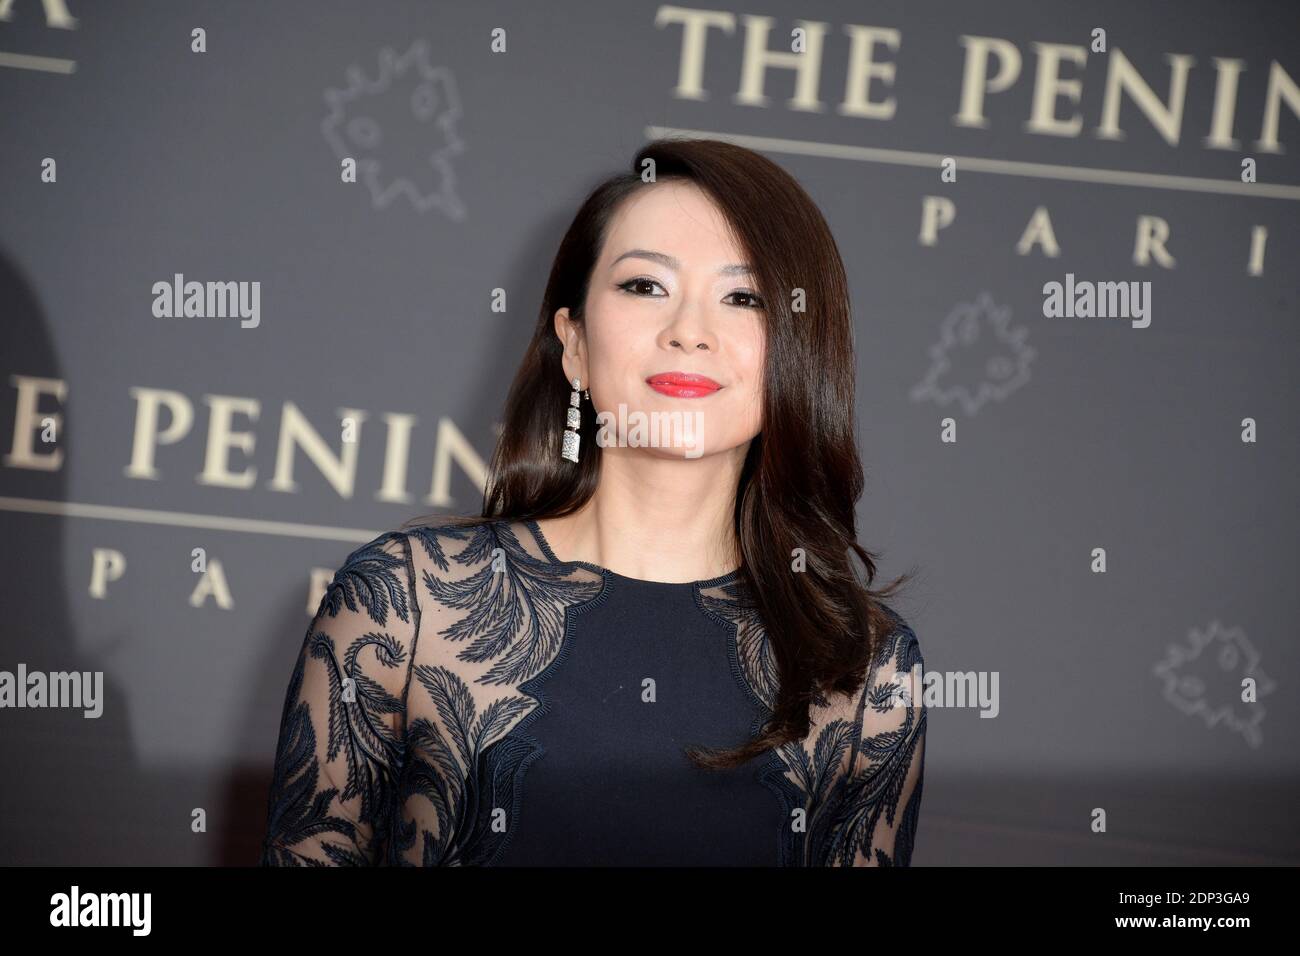 Zhang Ziyi attending the Peninsula Paris Photocall Opening Ceremony in Paris, France on April 16, 2015. Photo by Nicolas Briquet/ABACAPRESS.COM Stock Photo